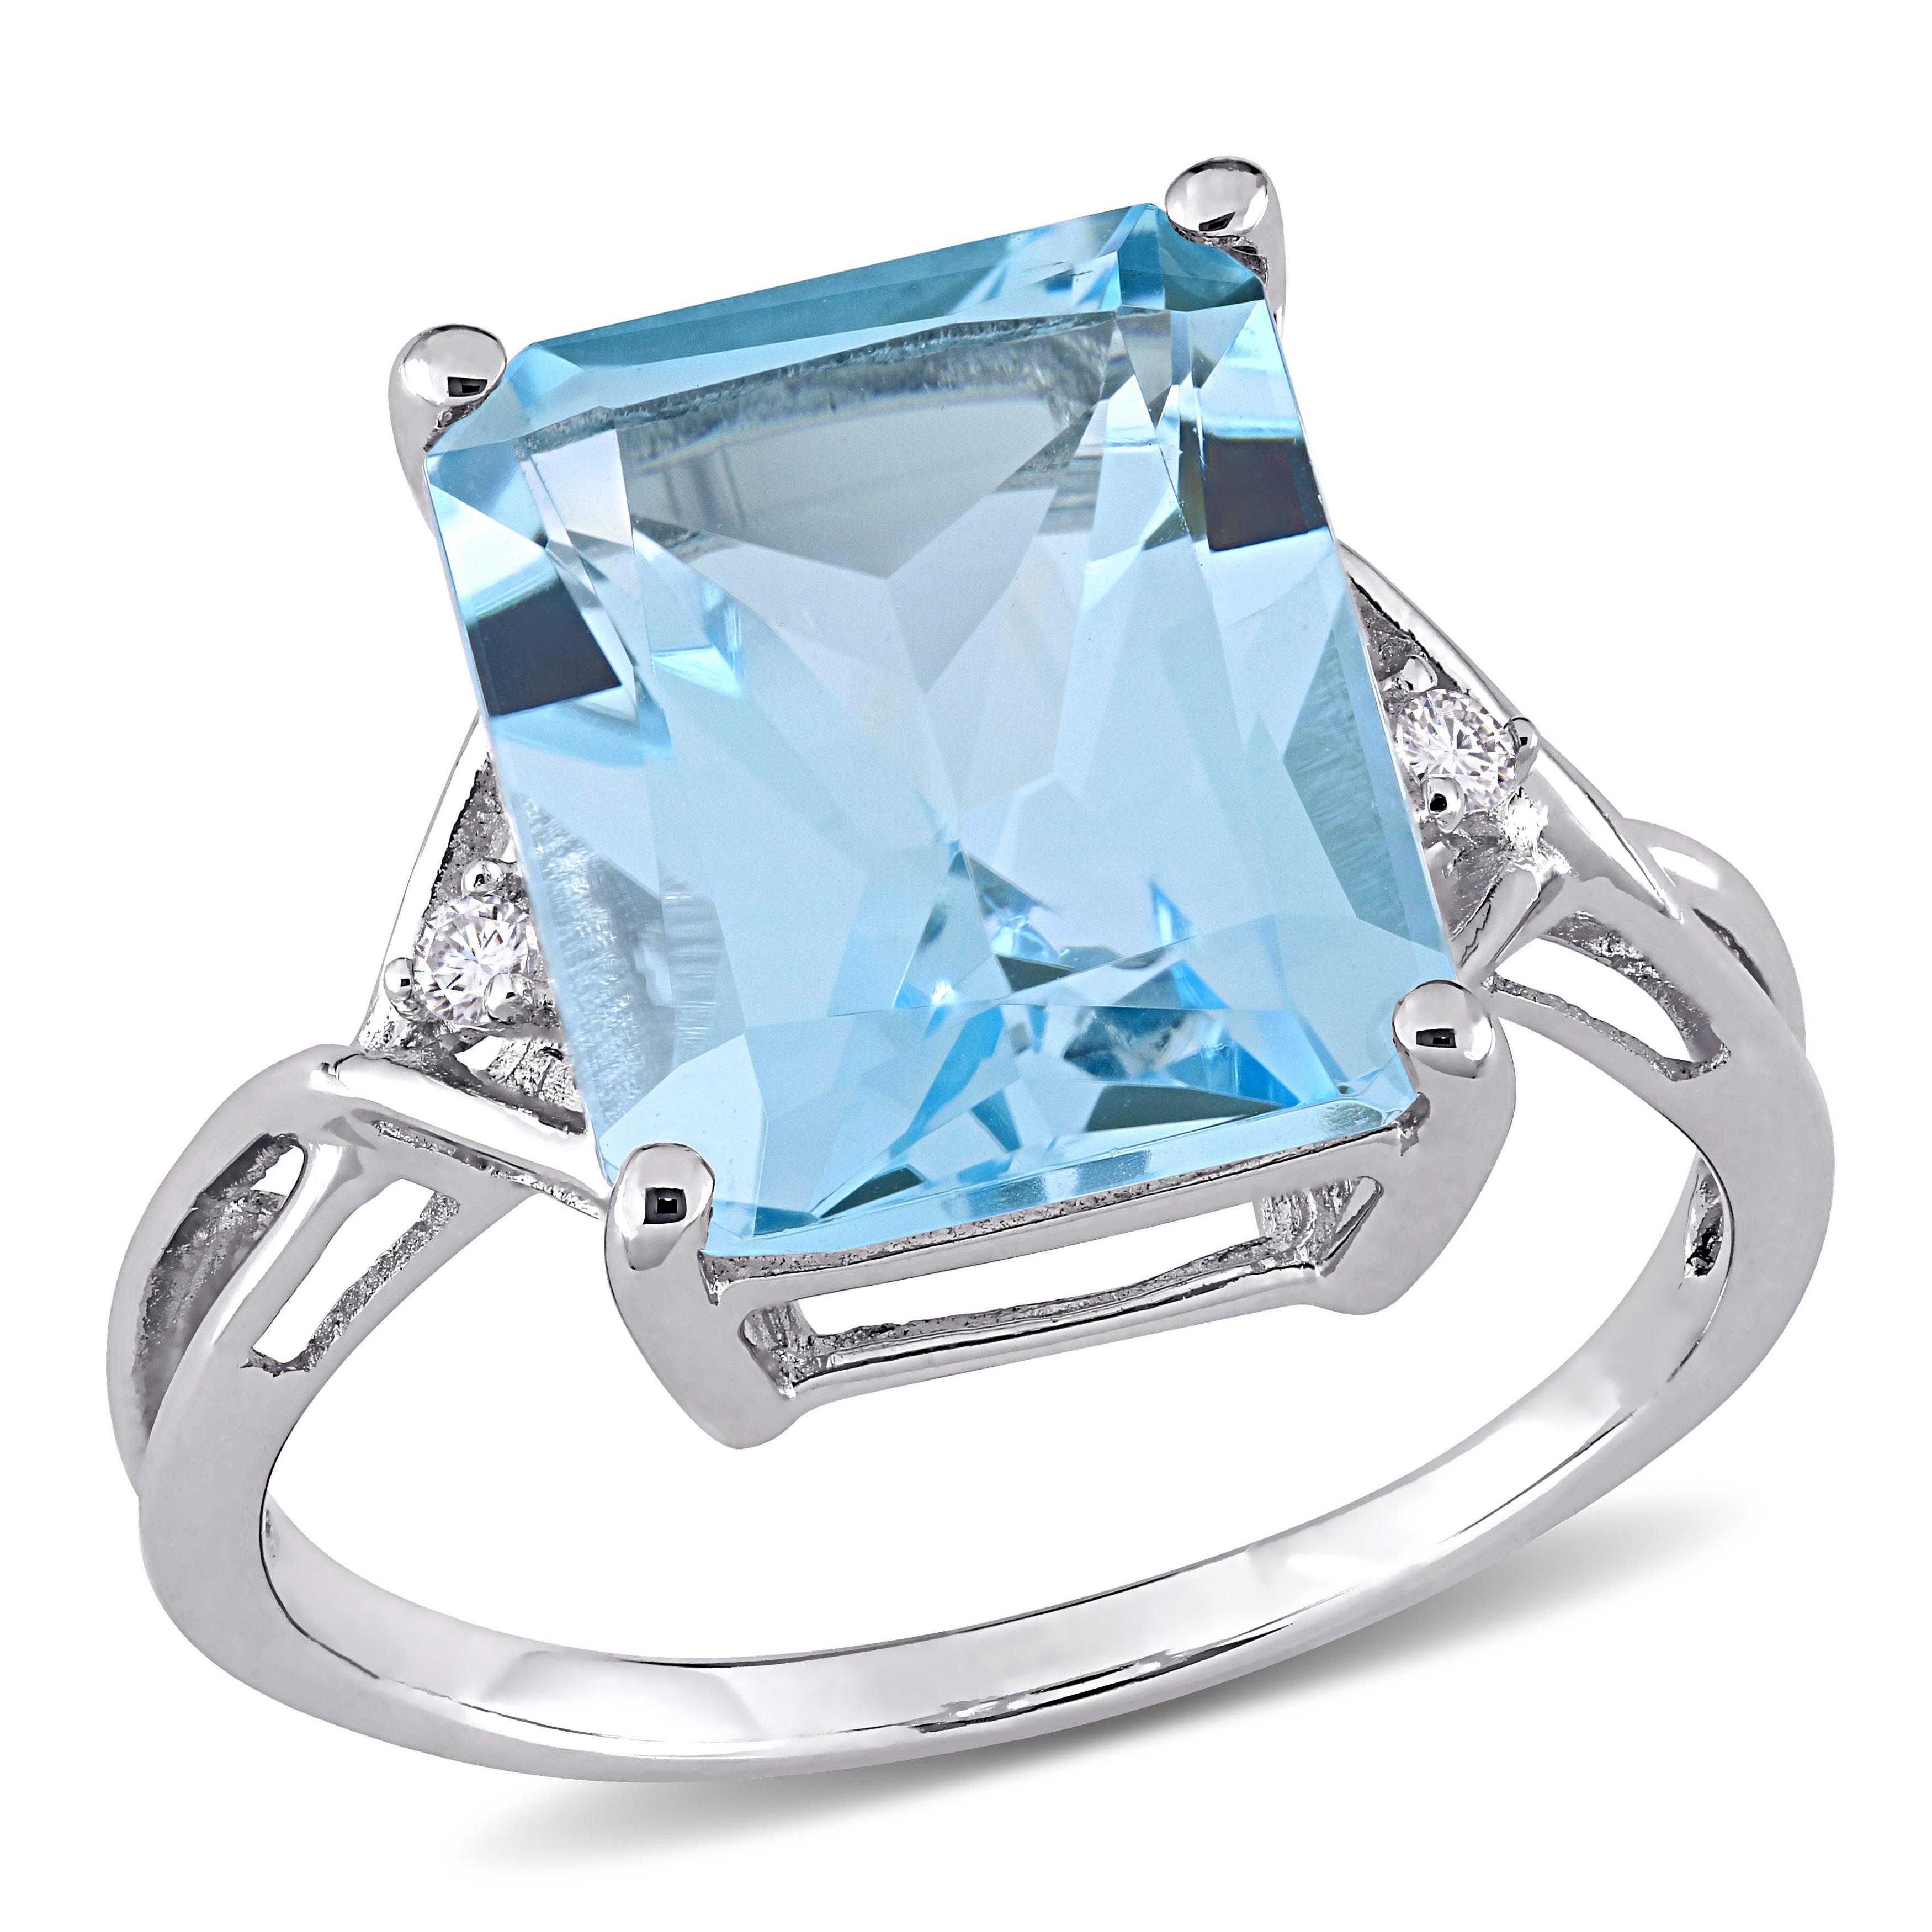 7 1/2 CT TGW Sky-Blue Topaz Cocktail Ring in Sterling Silver